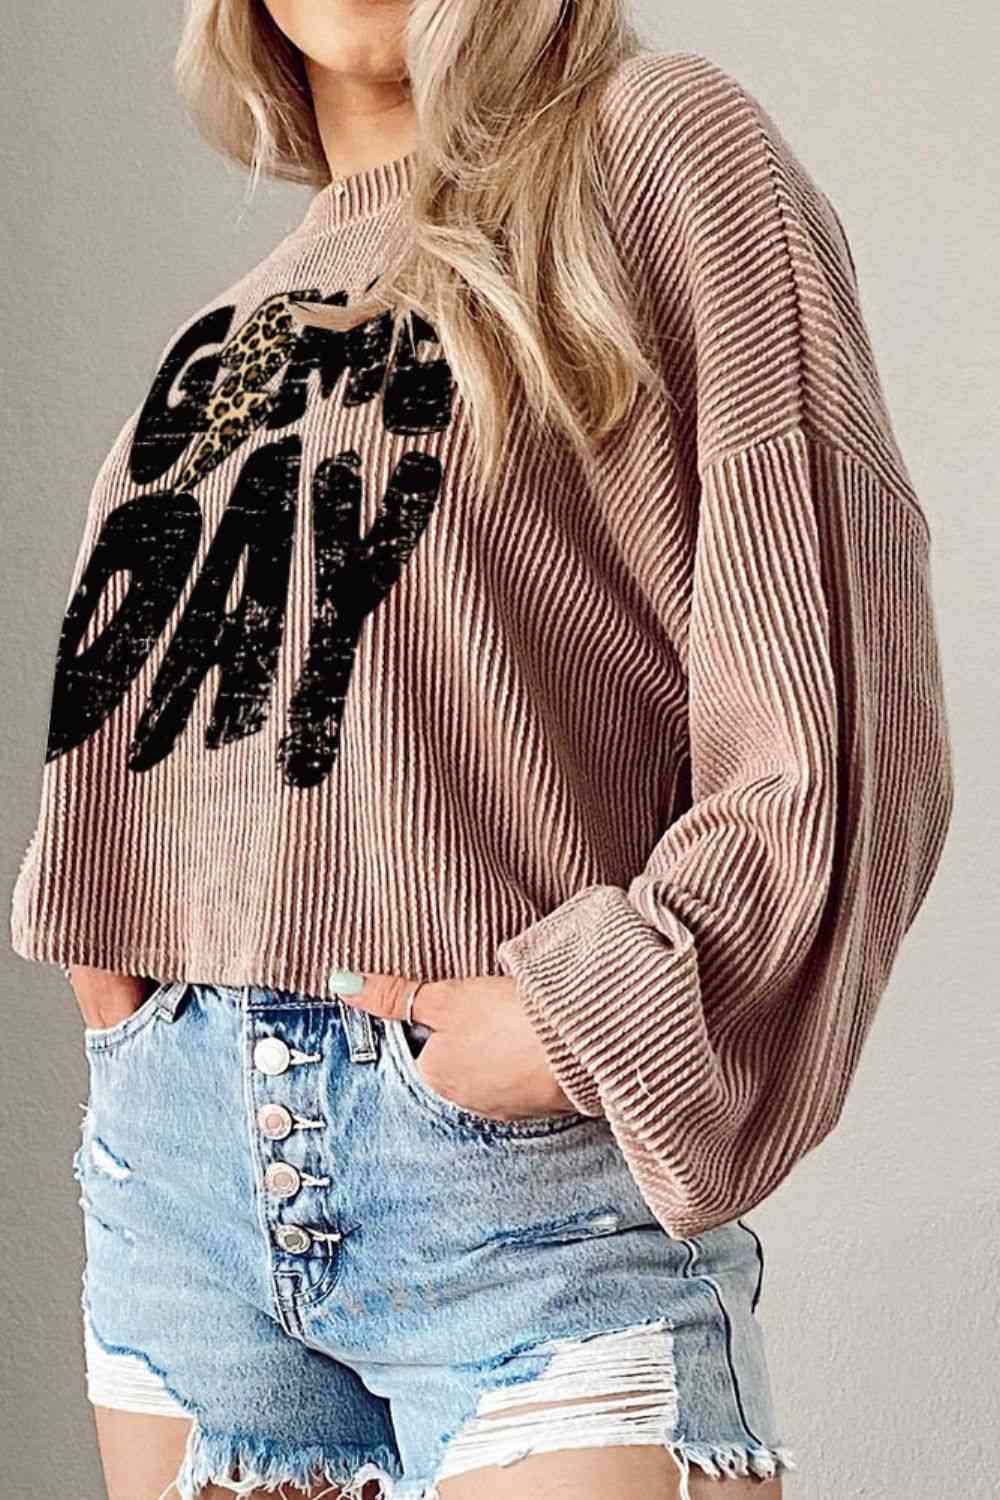 GAME DAY Graphic Blouse